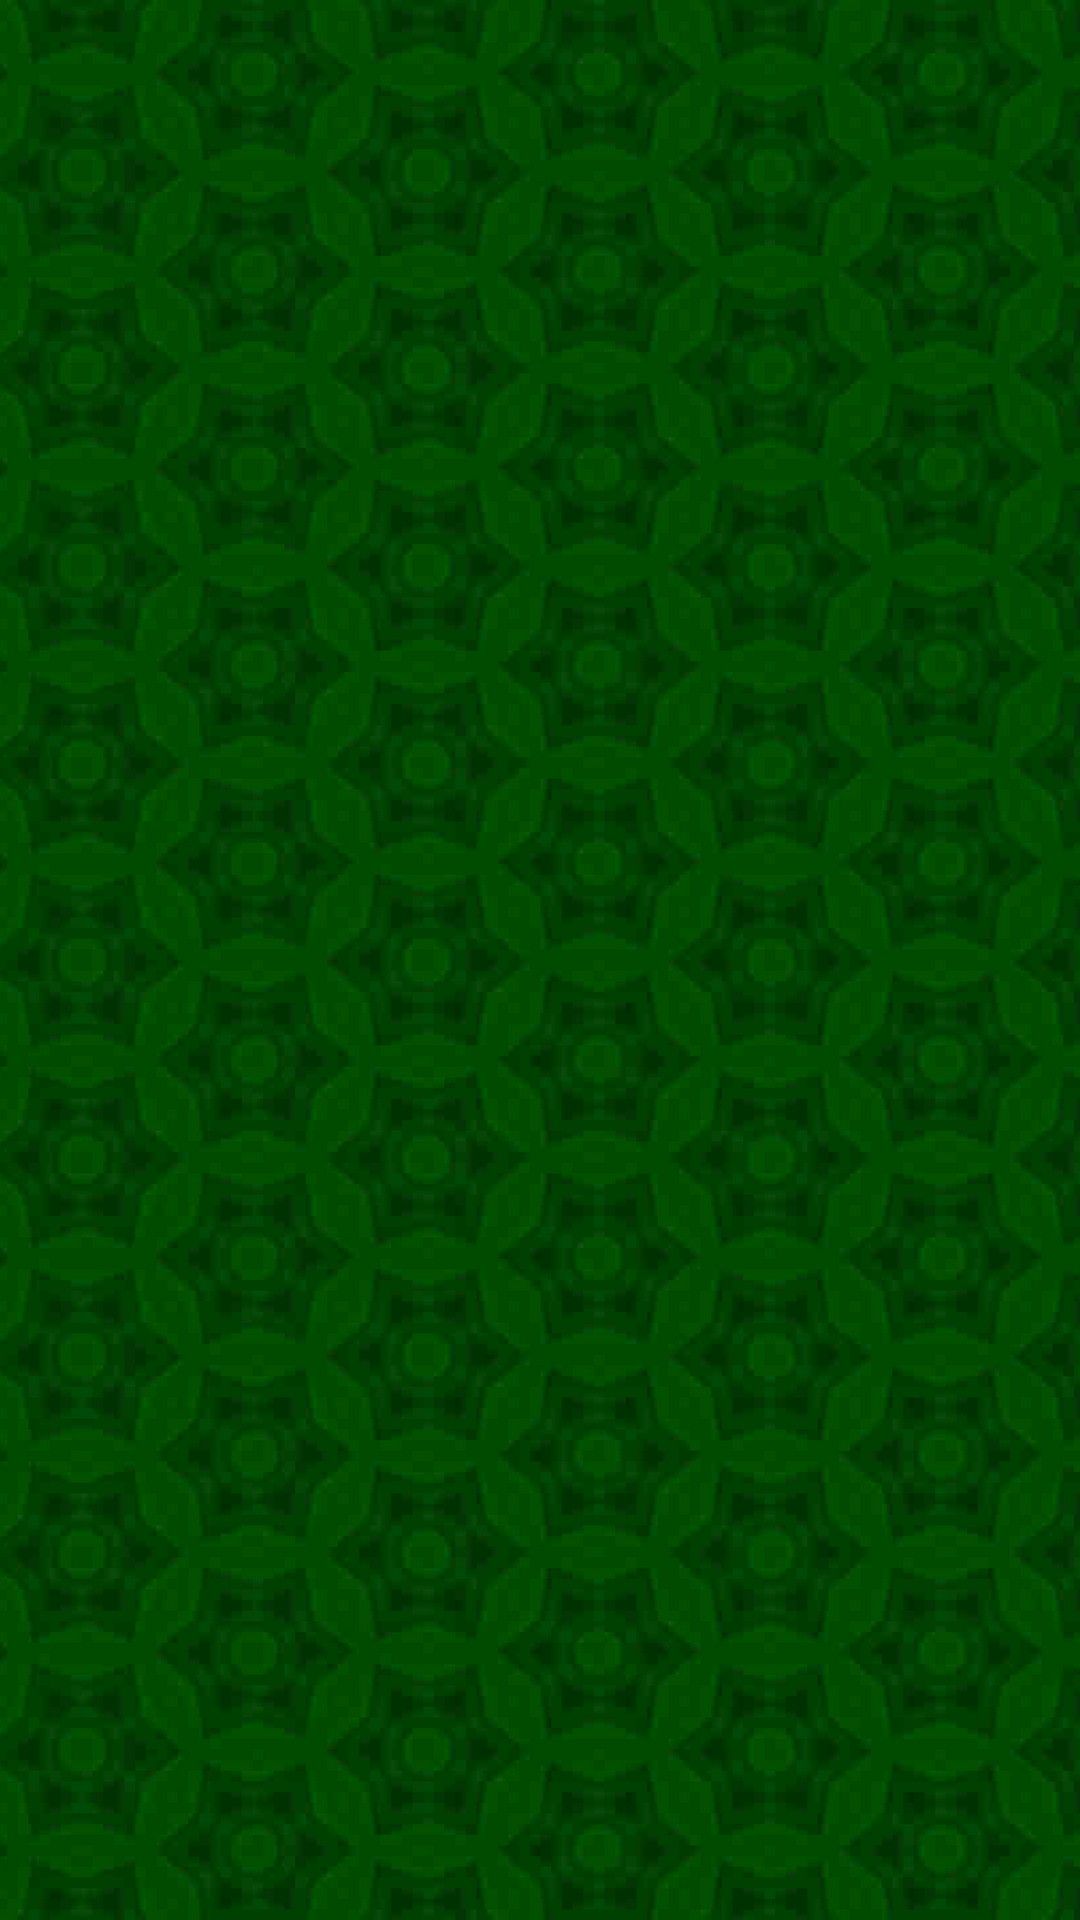 Dark Green HD Wallpaper For Android Android Wallpaper